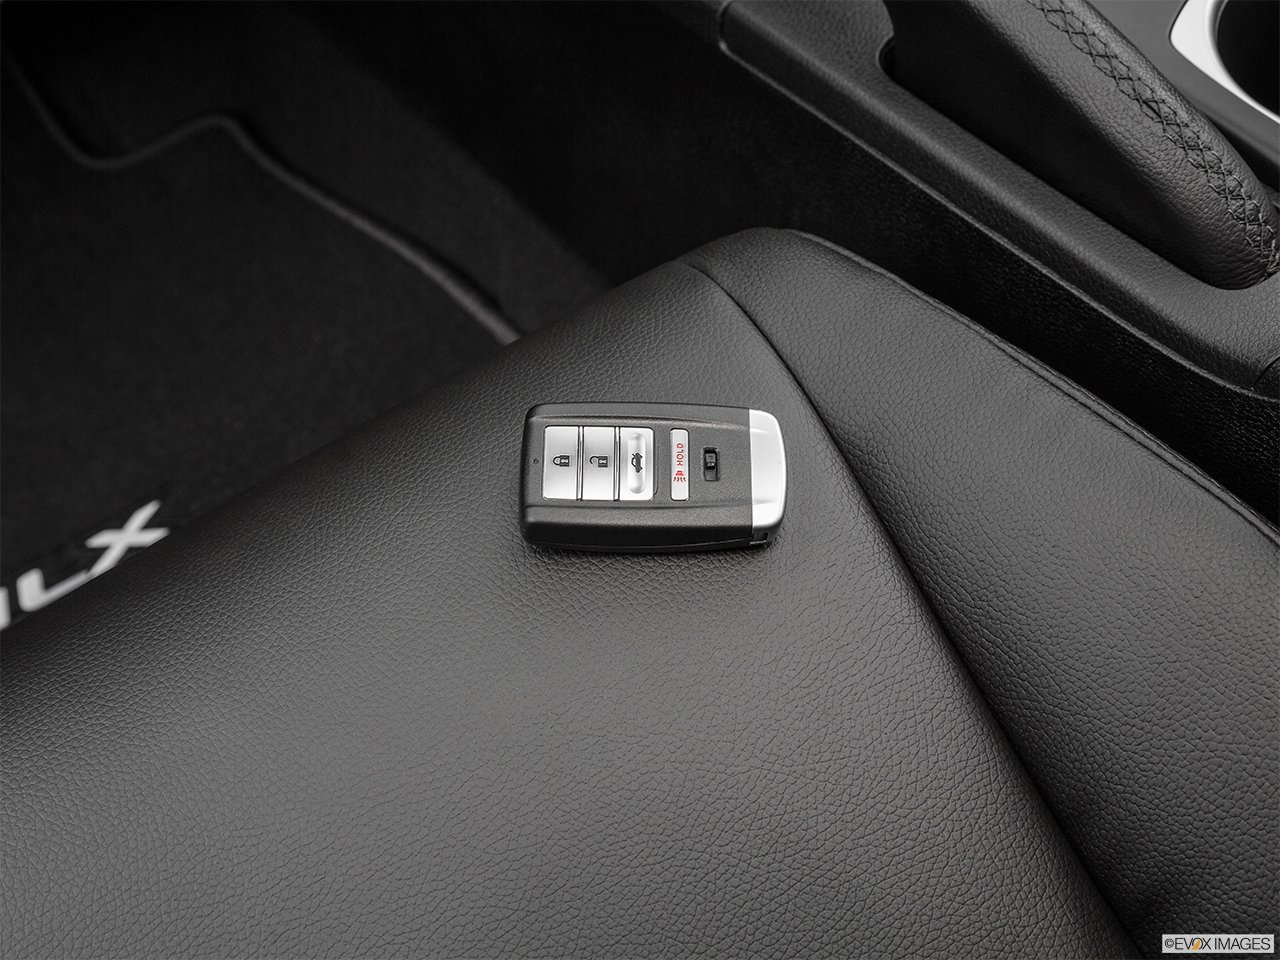 2016 Acura ILX AcuraWatch Plus Key fob on driver's seat. 